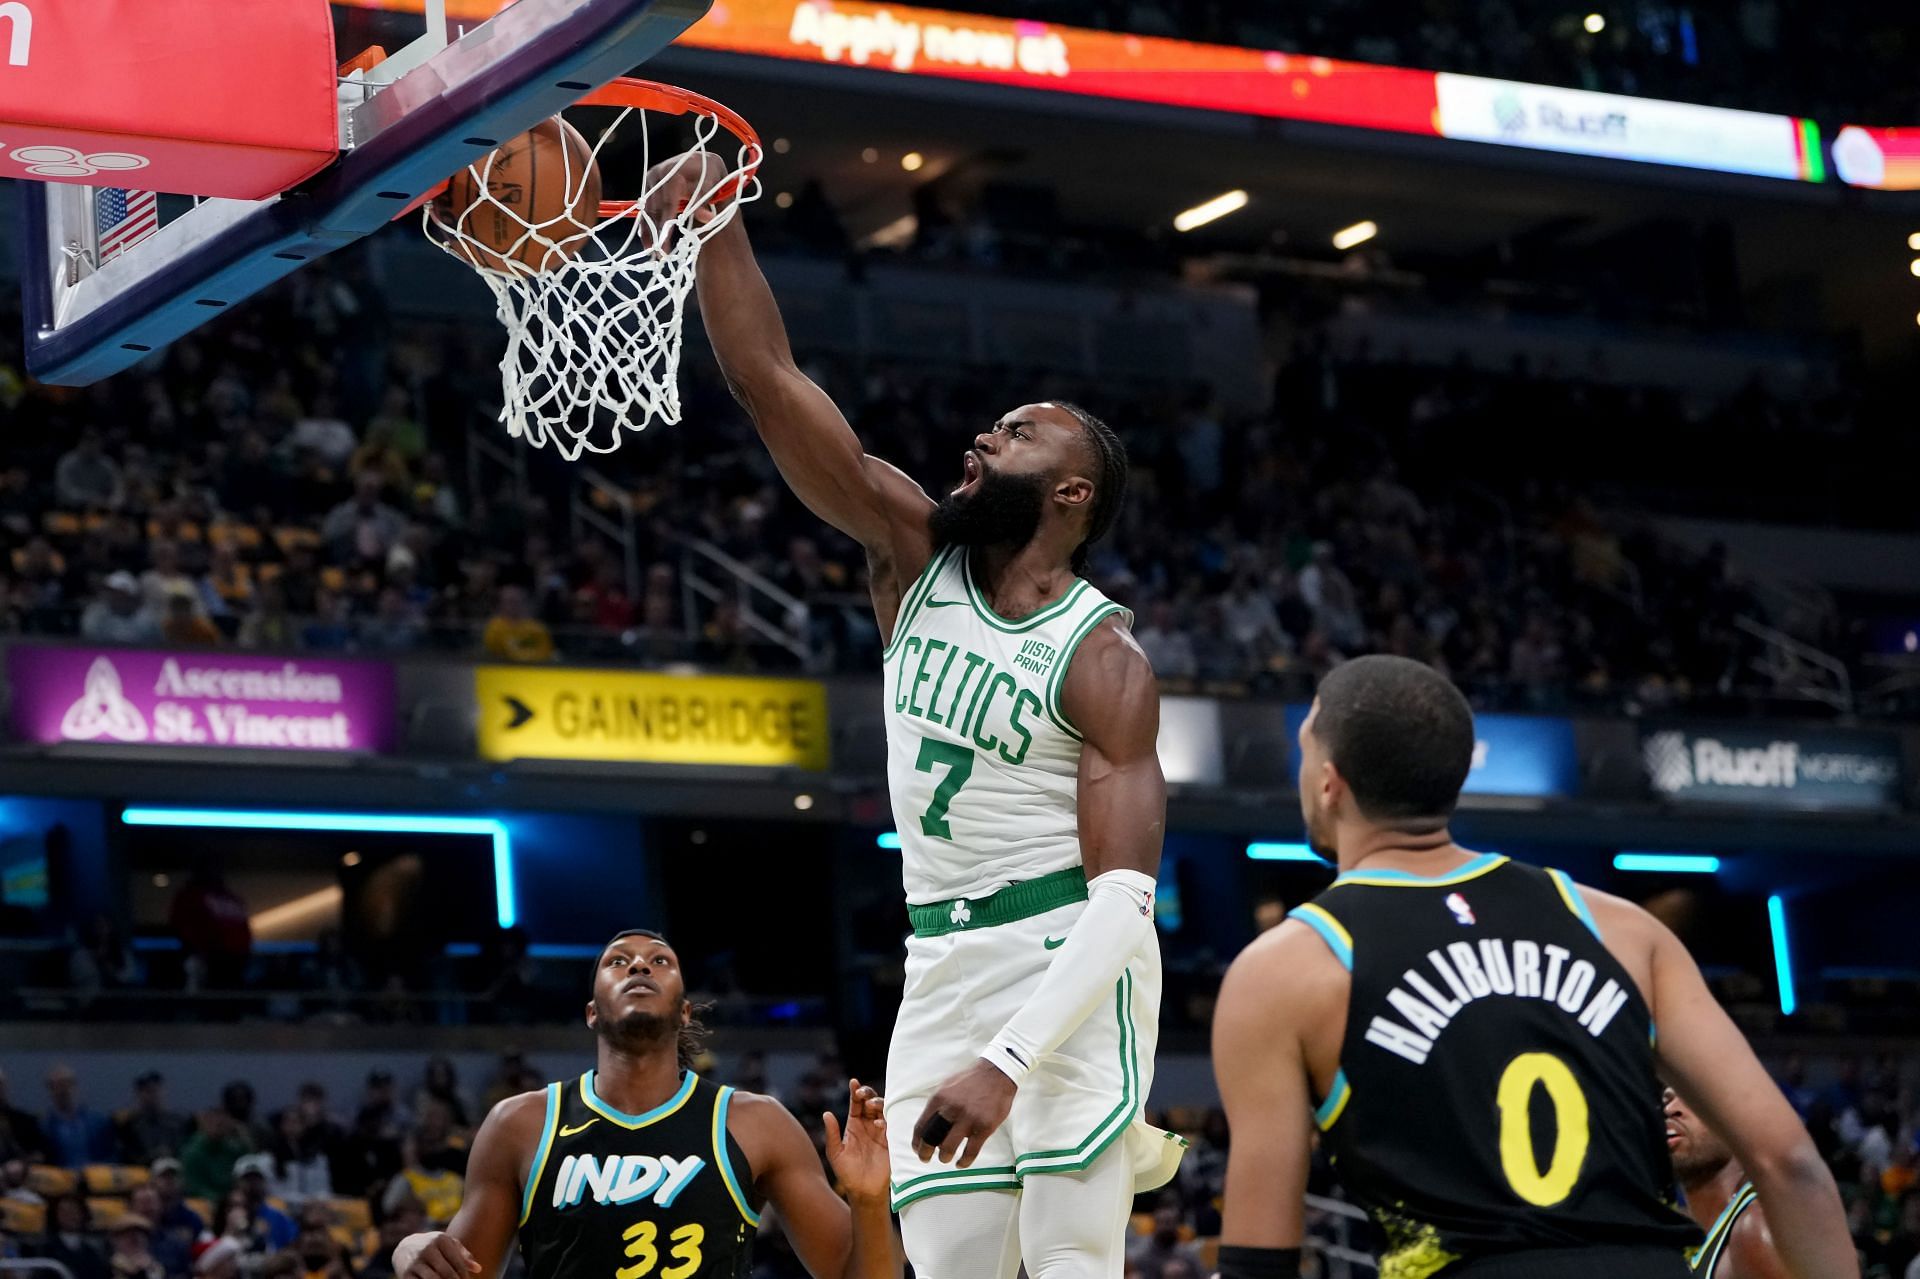 Jaylen Brown of the Boston Celtics against the Indiana Pacers.